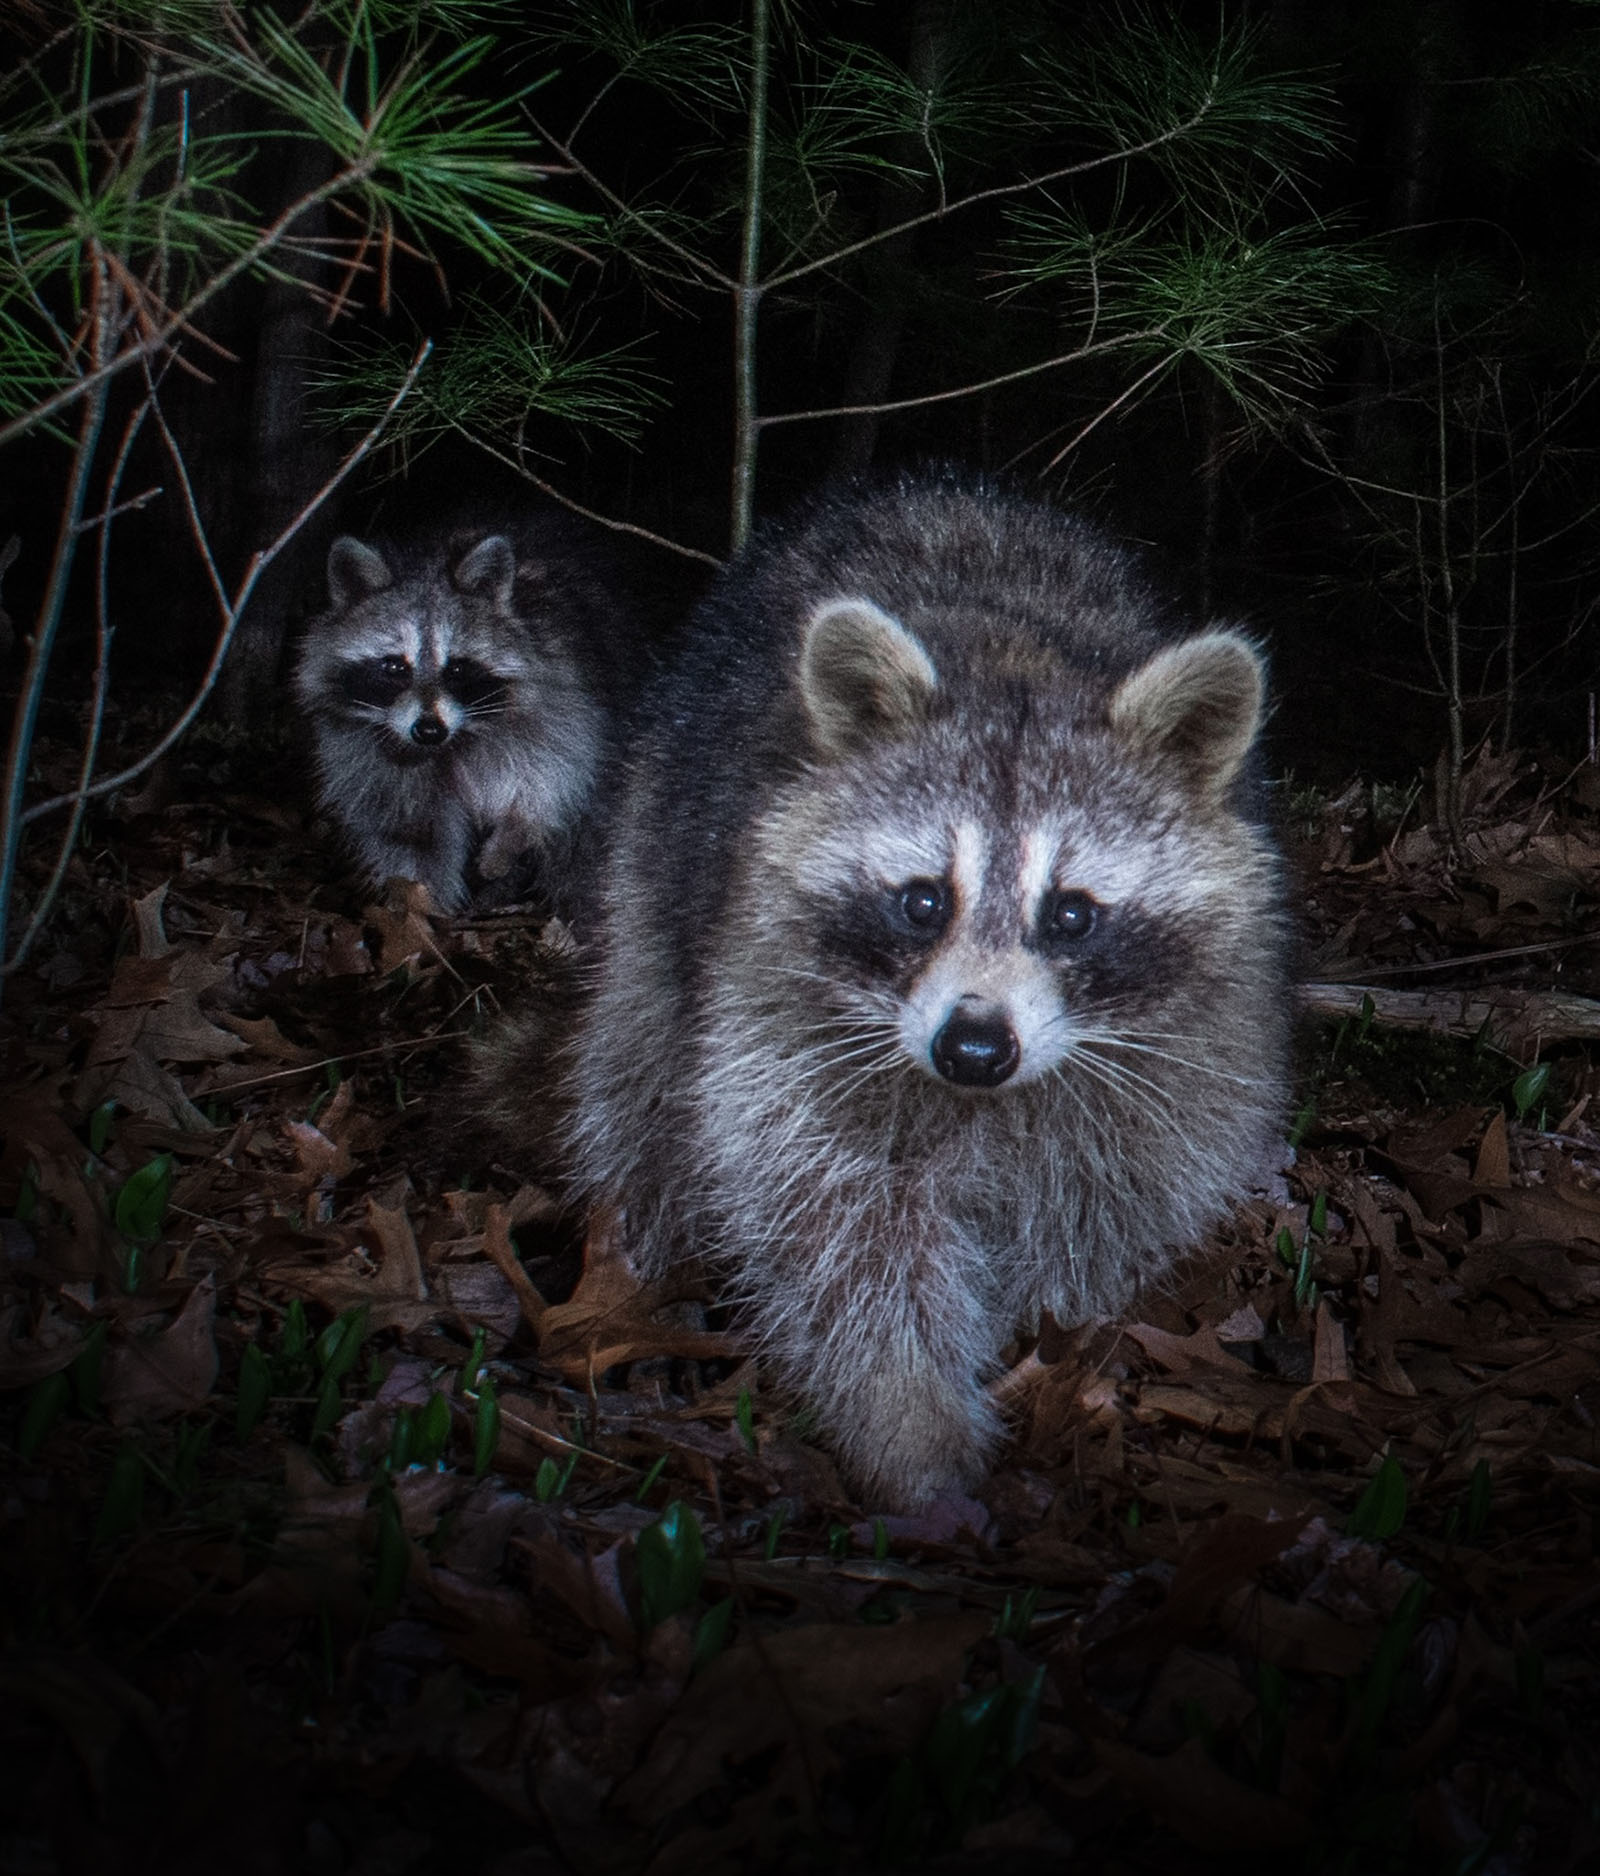 Two raccoons approach a camera in the woods at night.